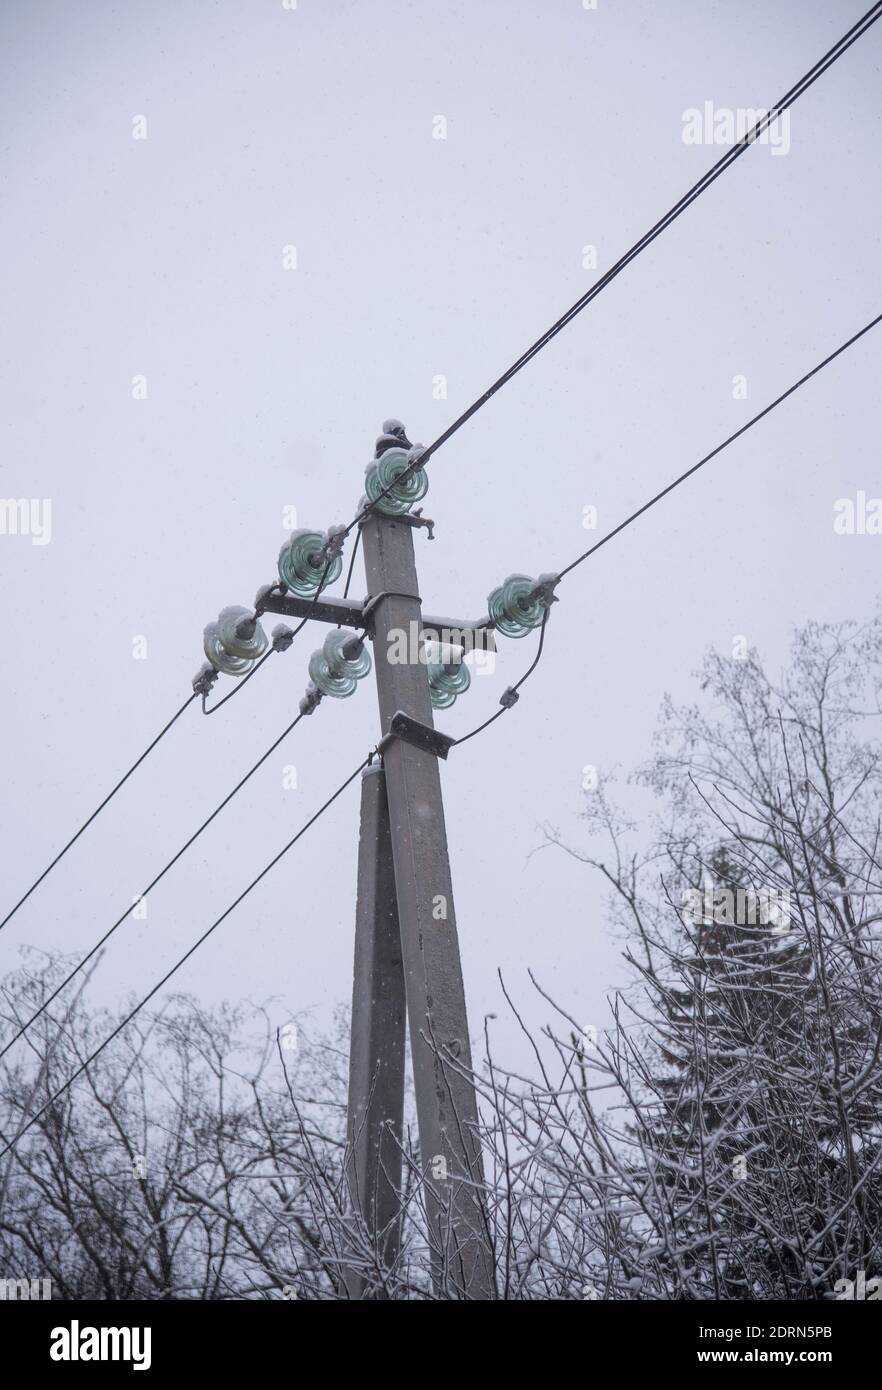 Power line sprinkled with snow against the background of a cloudy sky on a winter day. Stock Photo